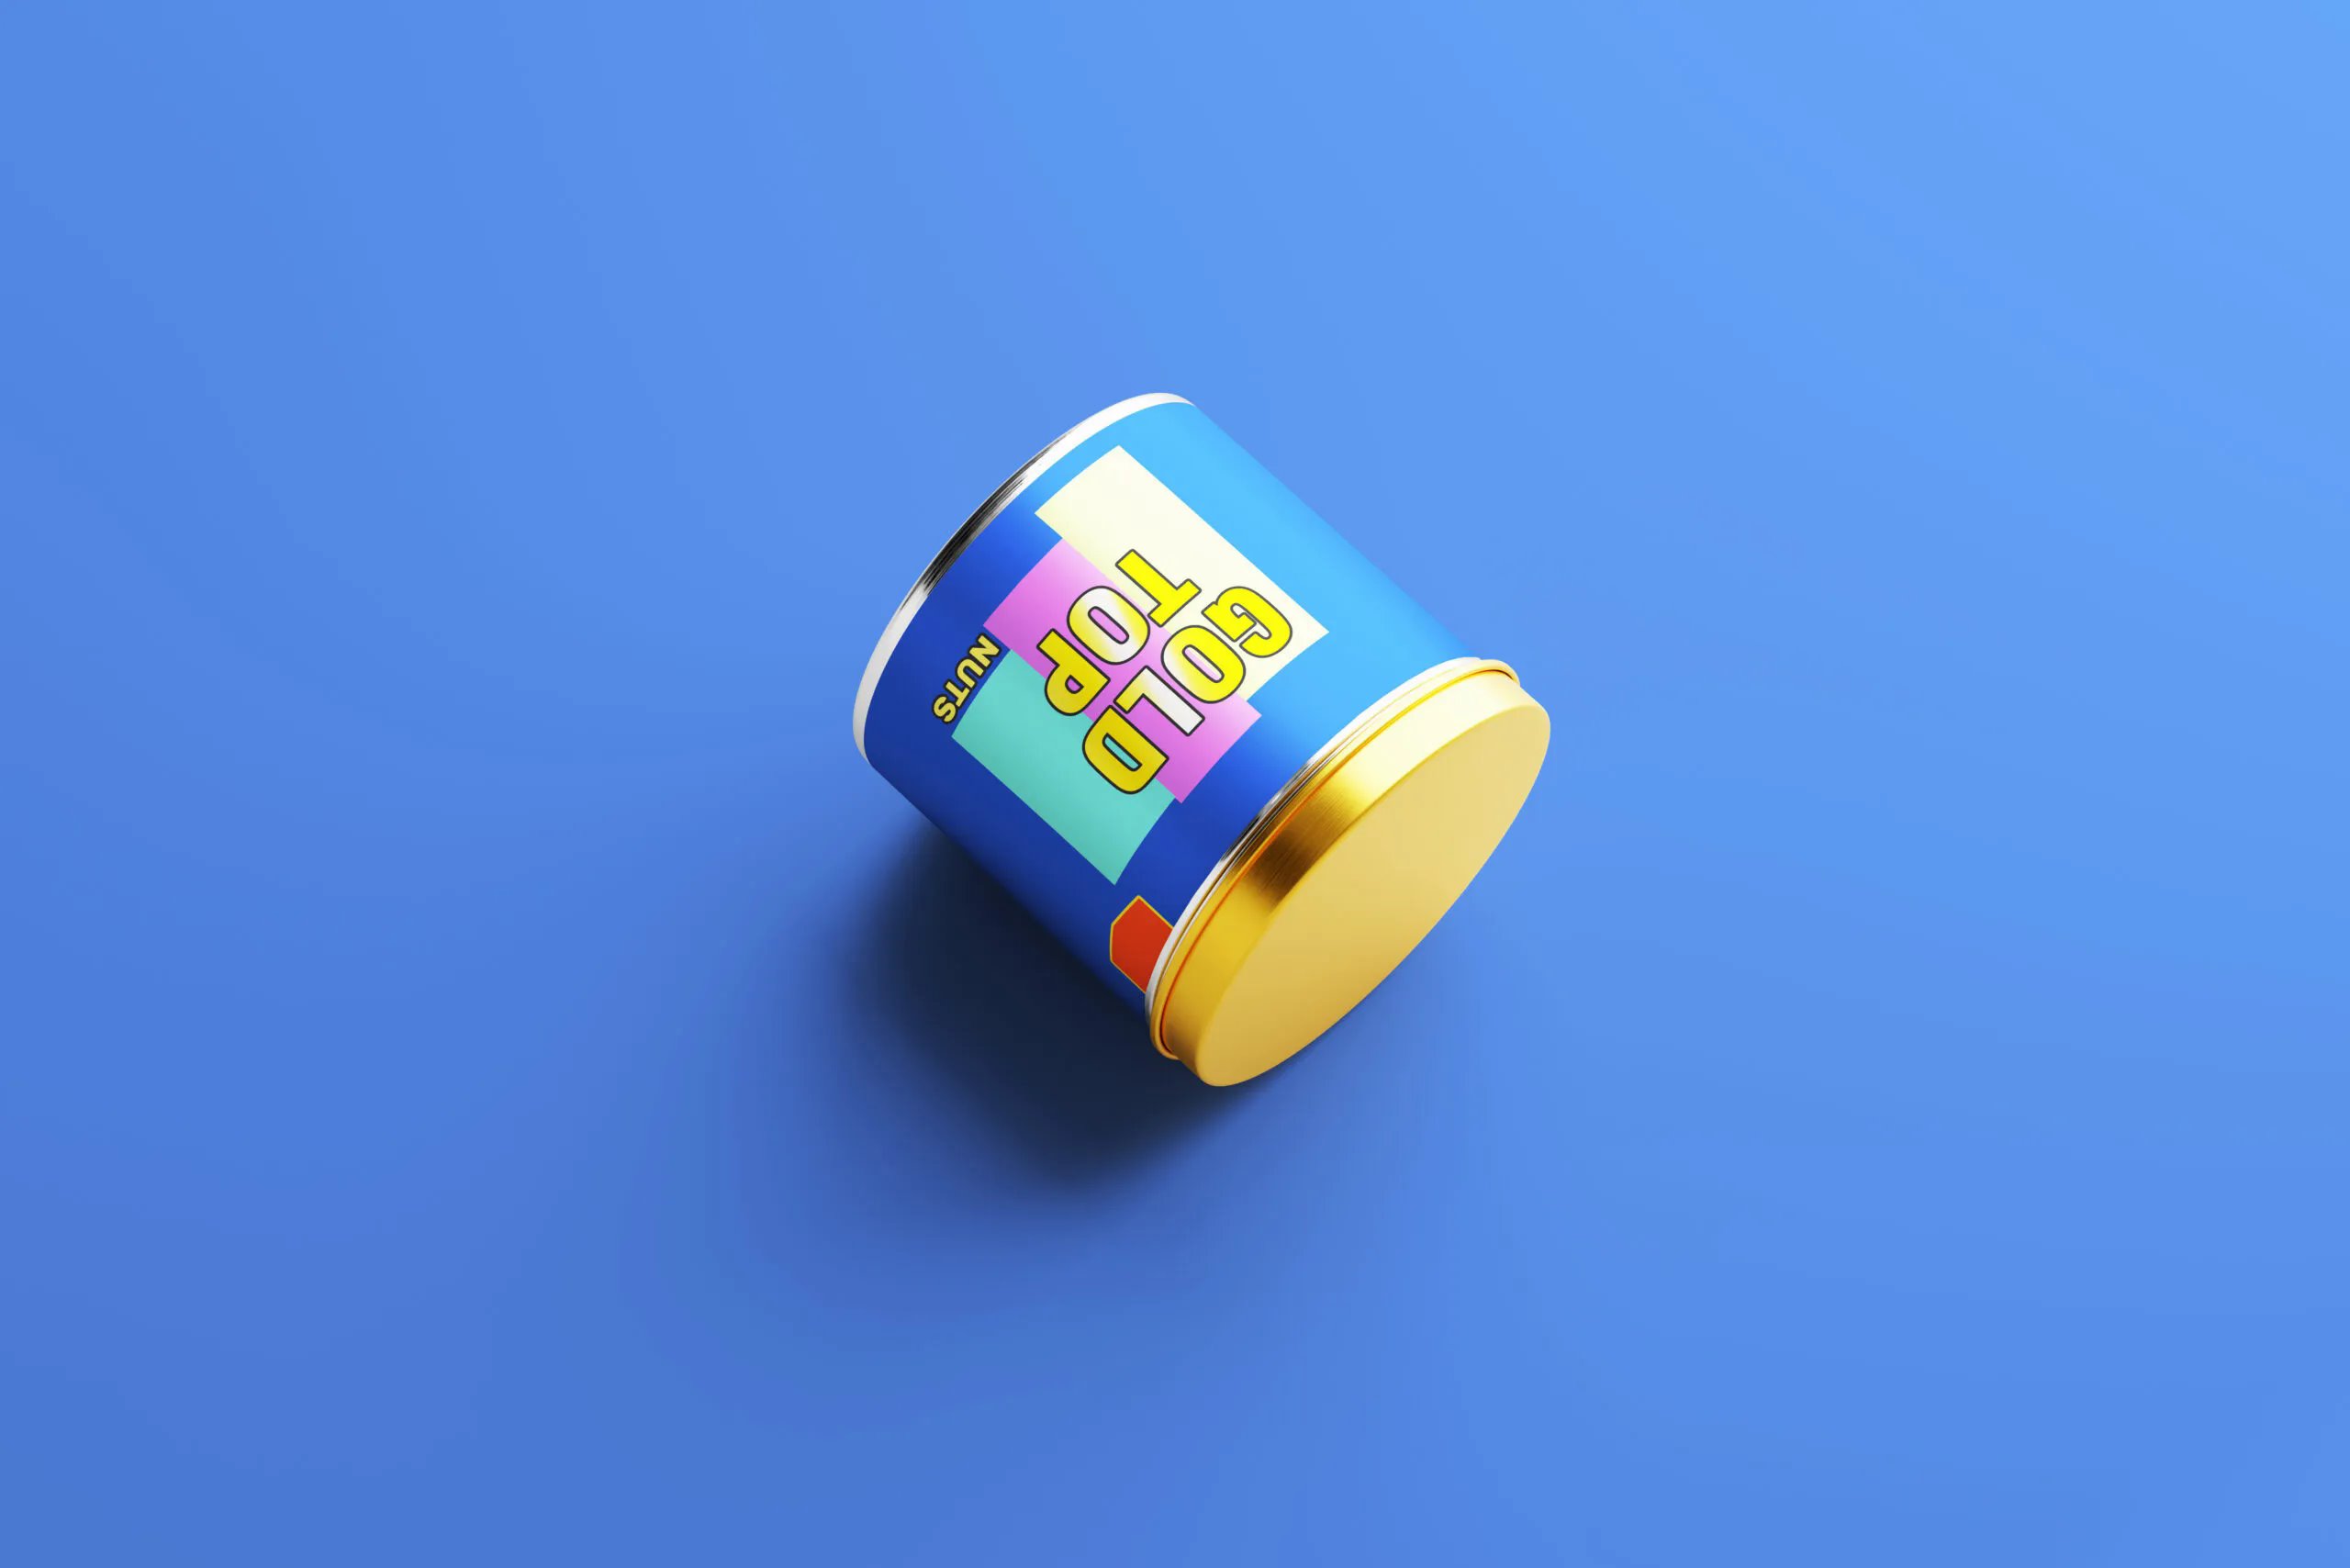 5 Nuts Tin Cans Mockups in Different Visions FREE PSD